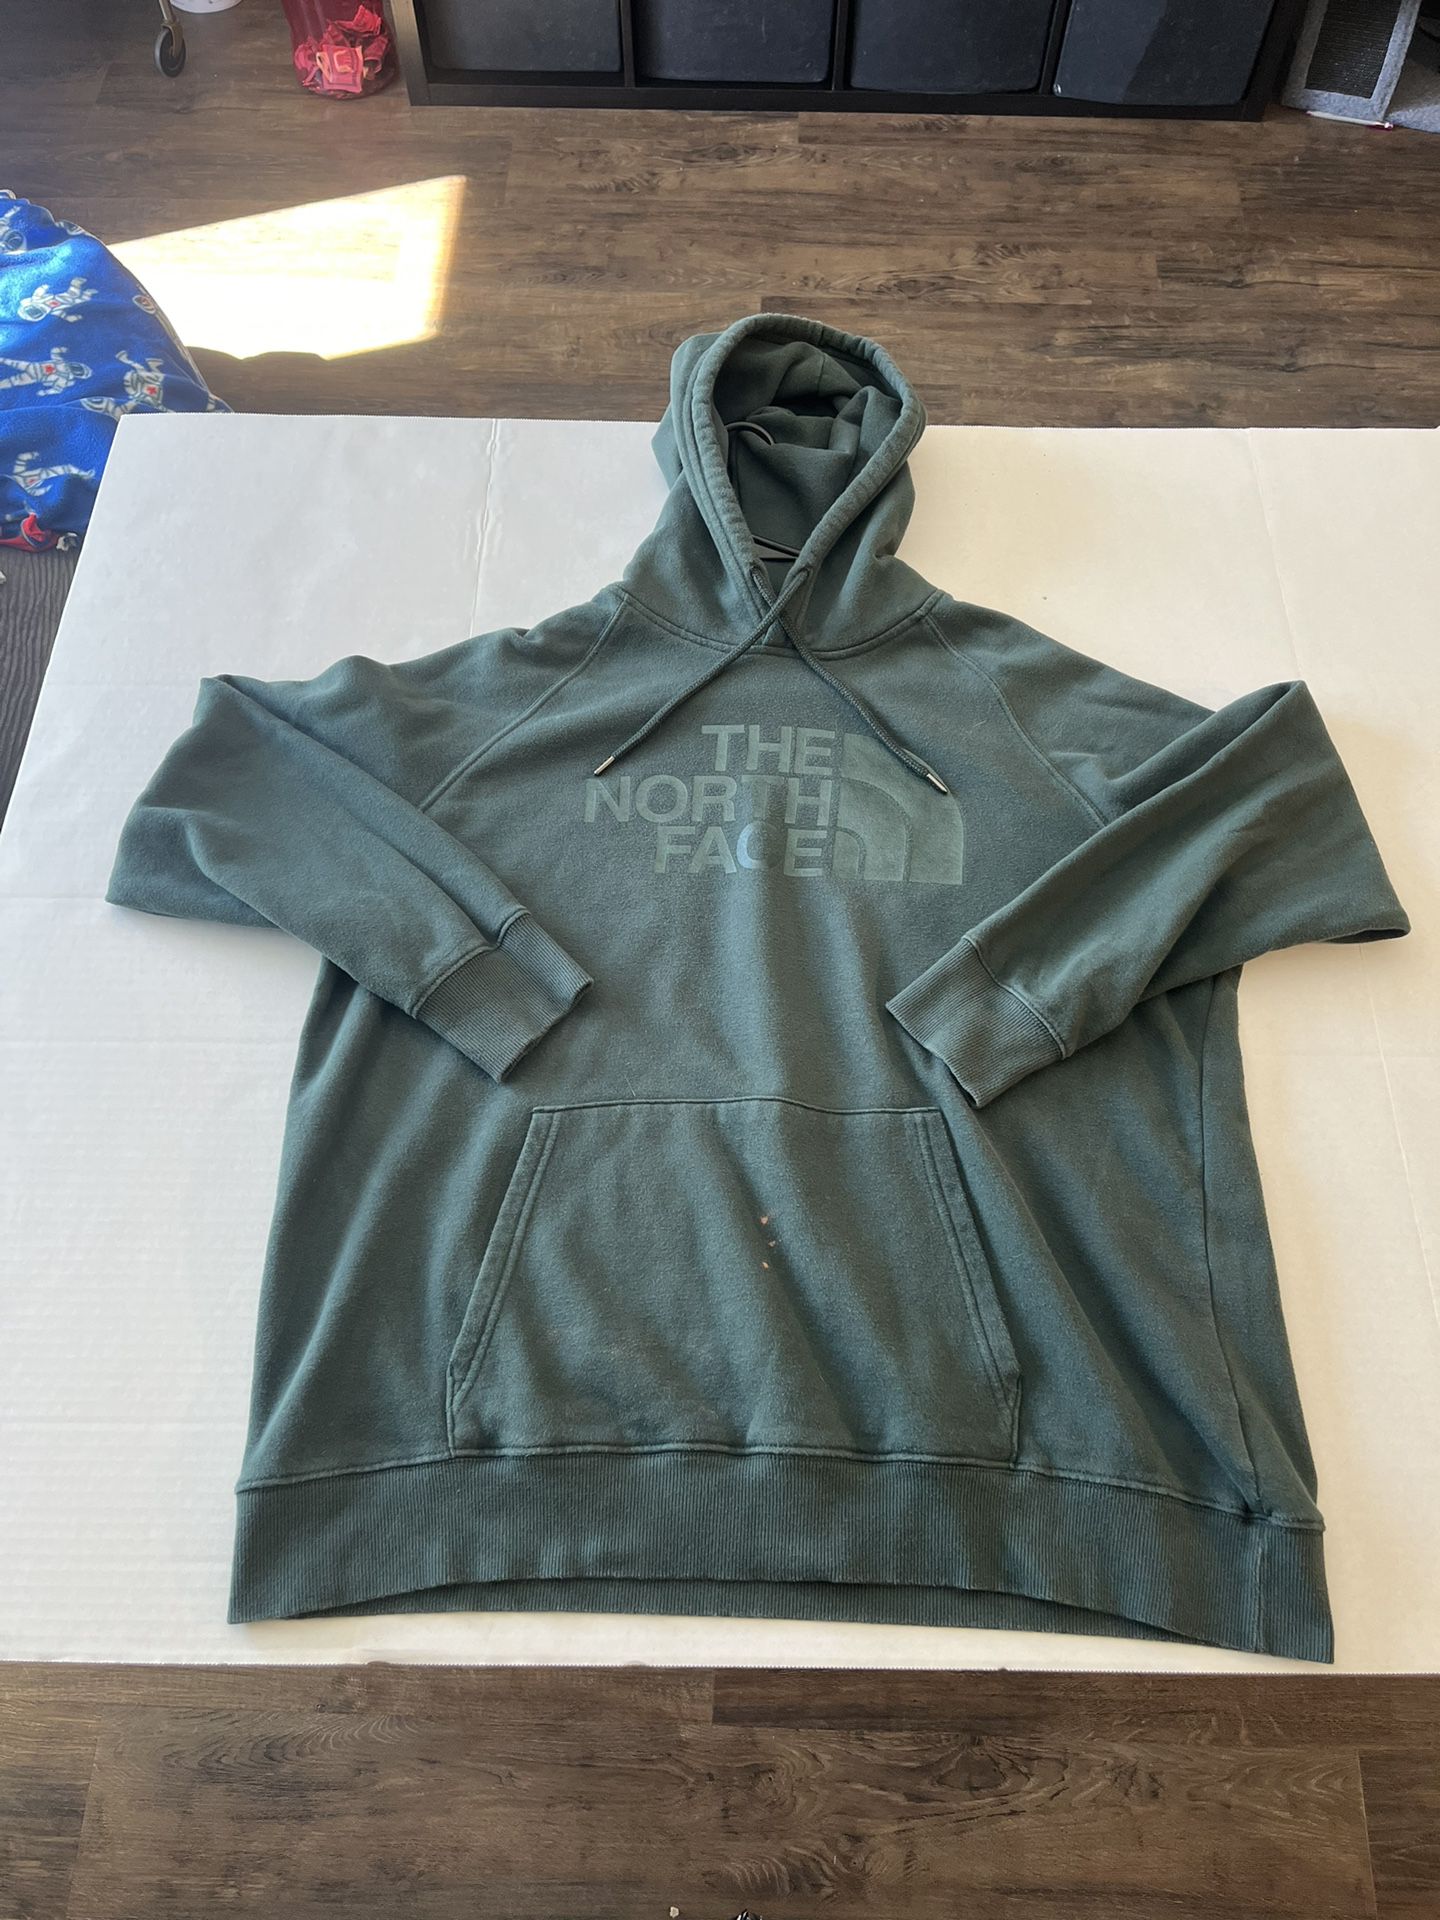 The North Face Green Women’s Hoodie - Size Large (With Stain)